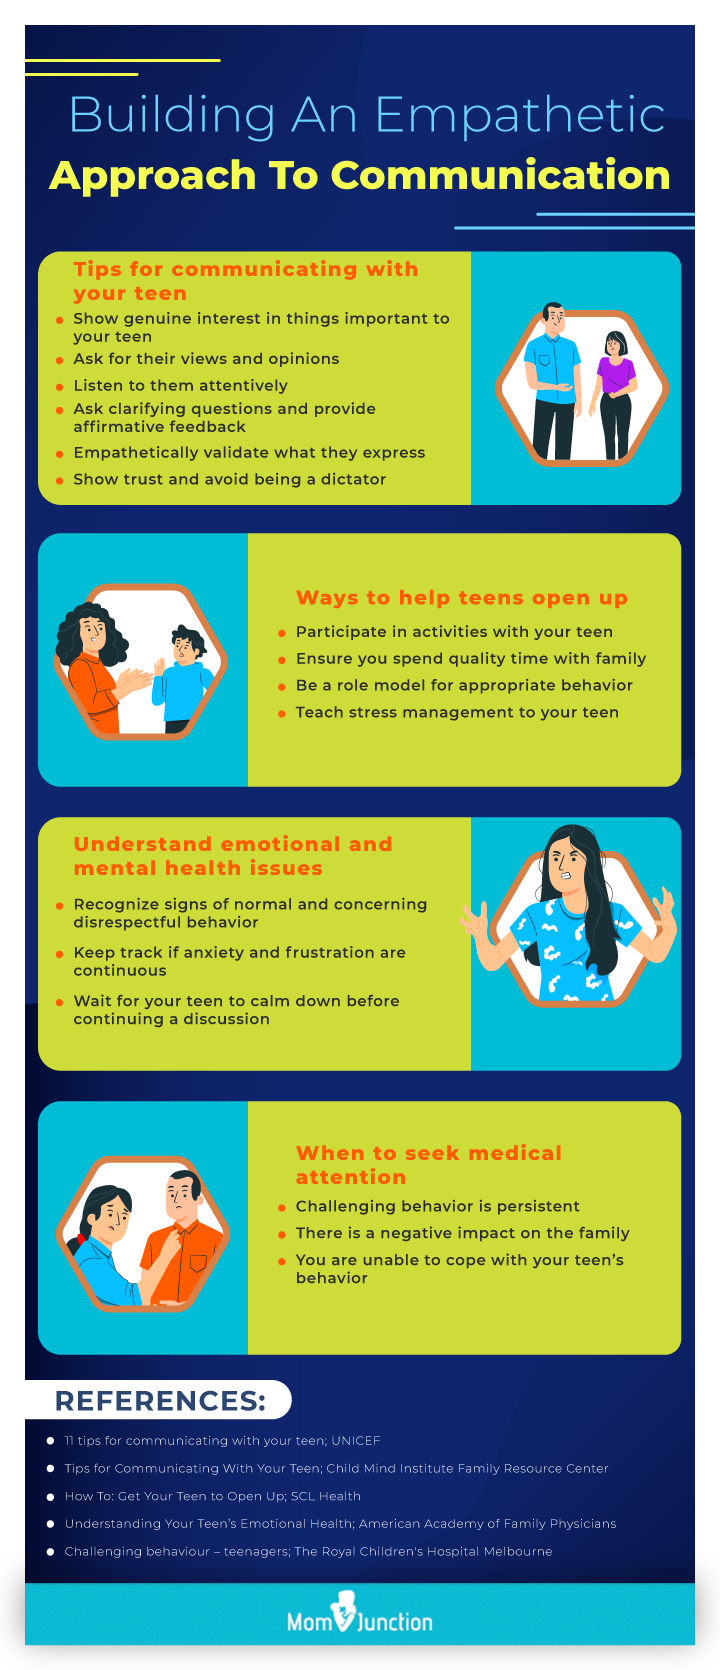 building an empathetic approach to communication [infographic]